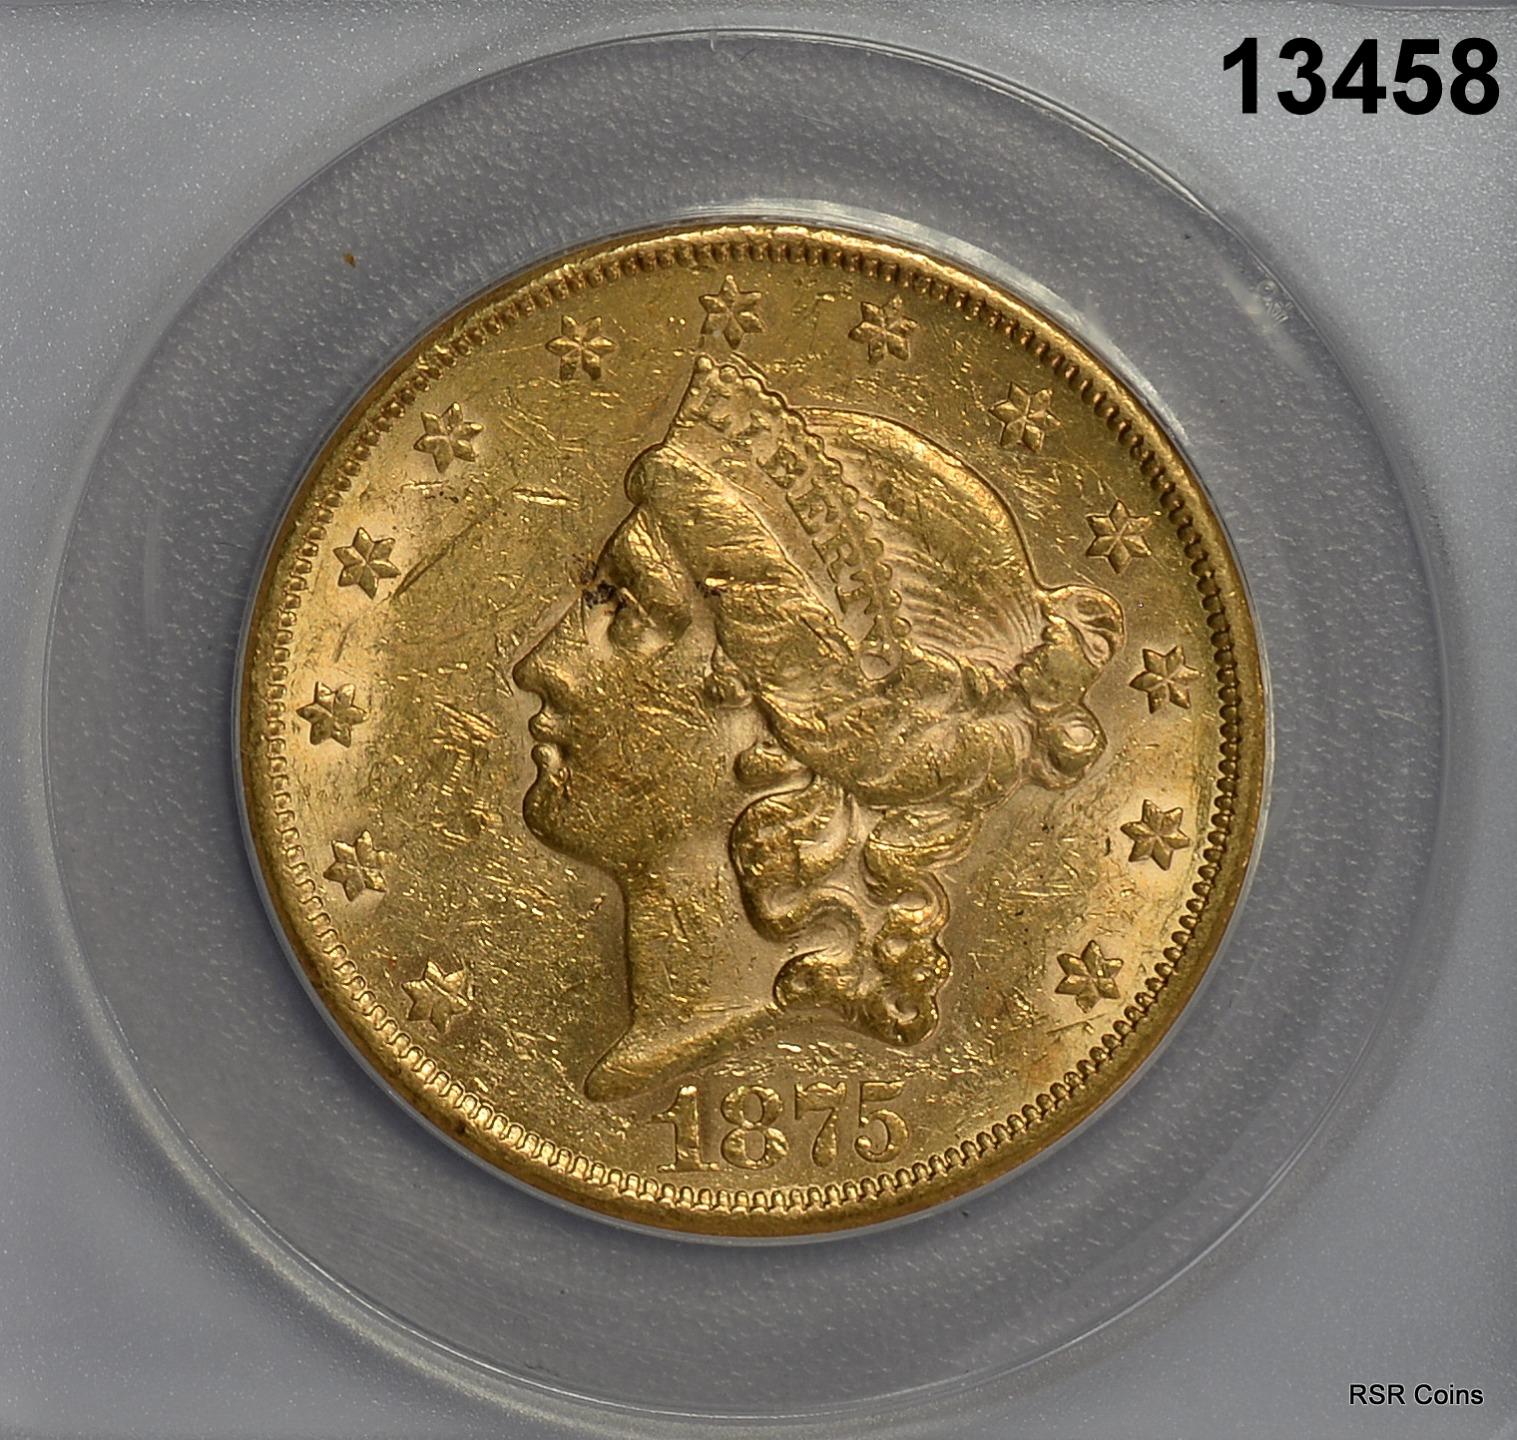 1875 CC $20 GOLD DOUBLE EAGLE RARE DATE ANACS CERTIFIED AU55 LOOKS BETTER #13458